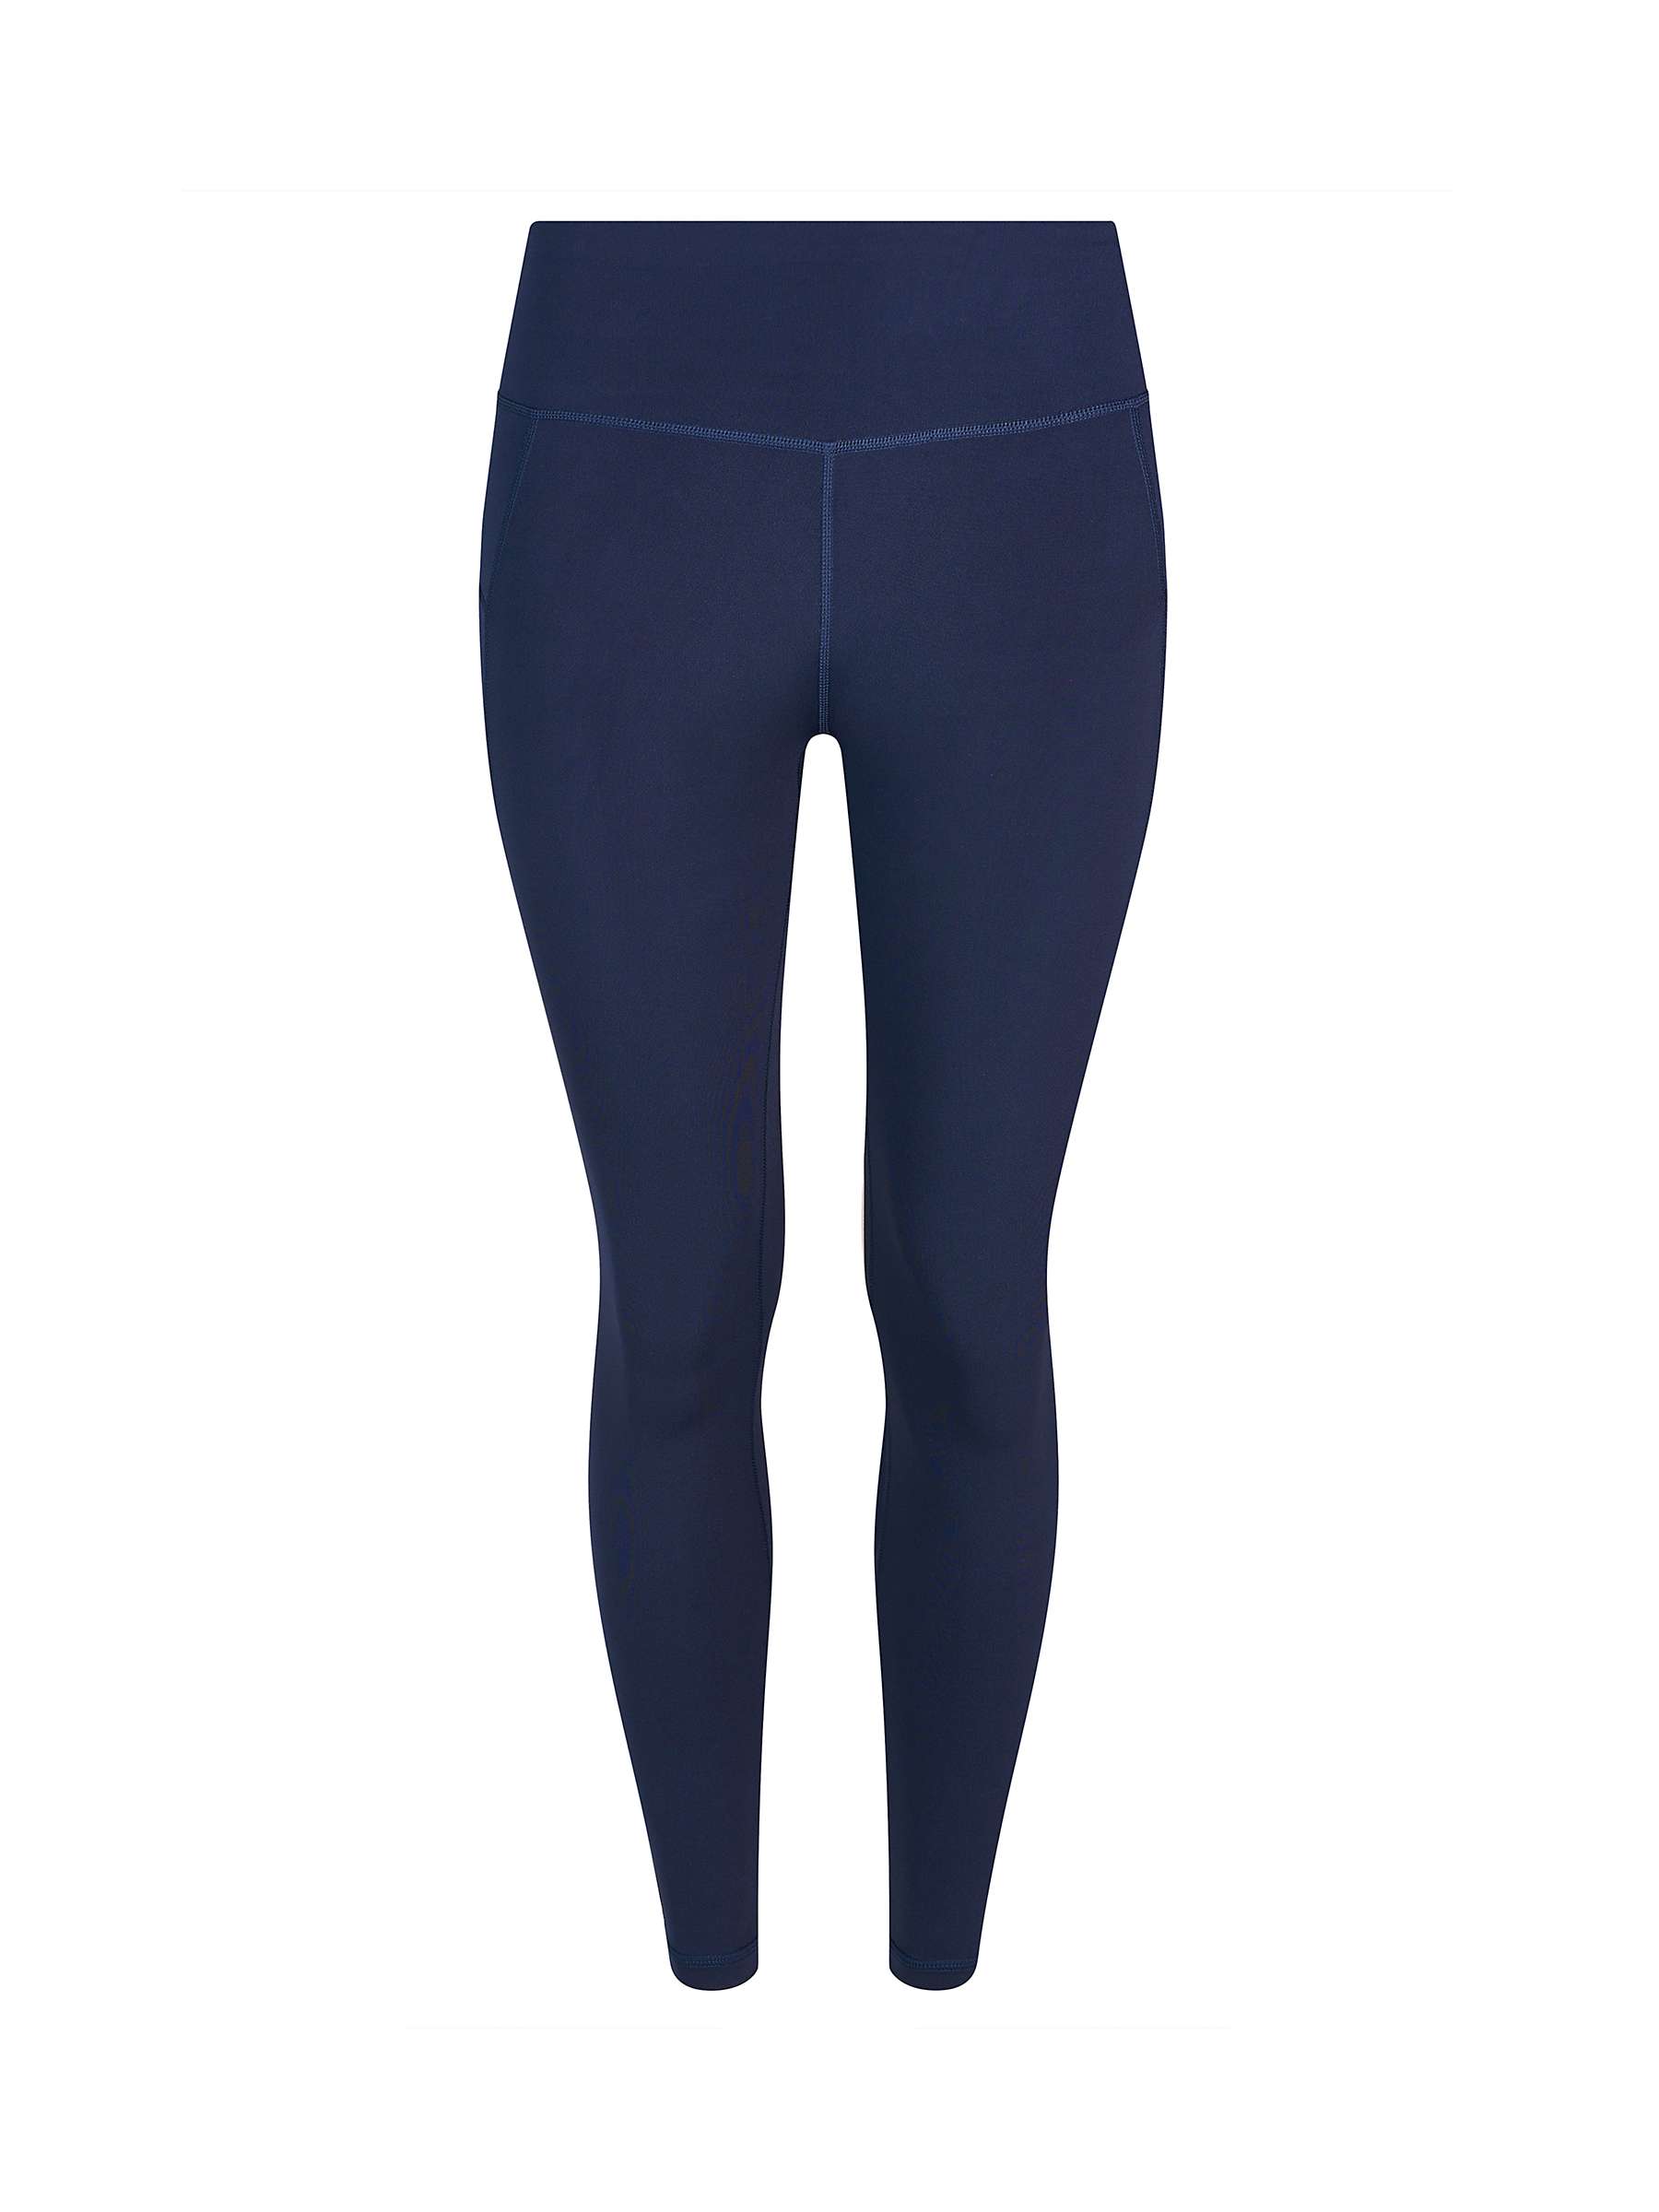 Buy Sweaty Betty All Day 7/8 Leggings Online at johnlewis.com